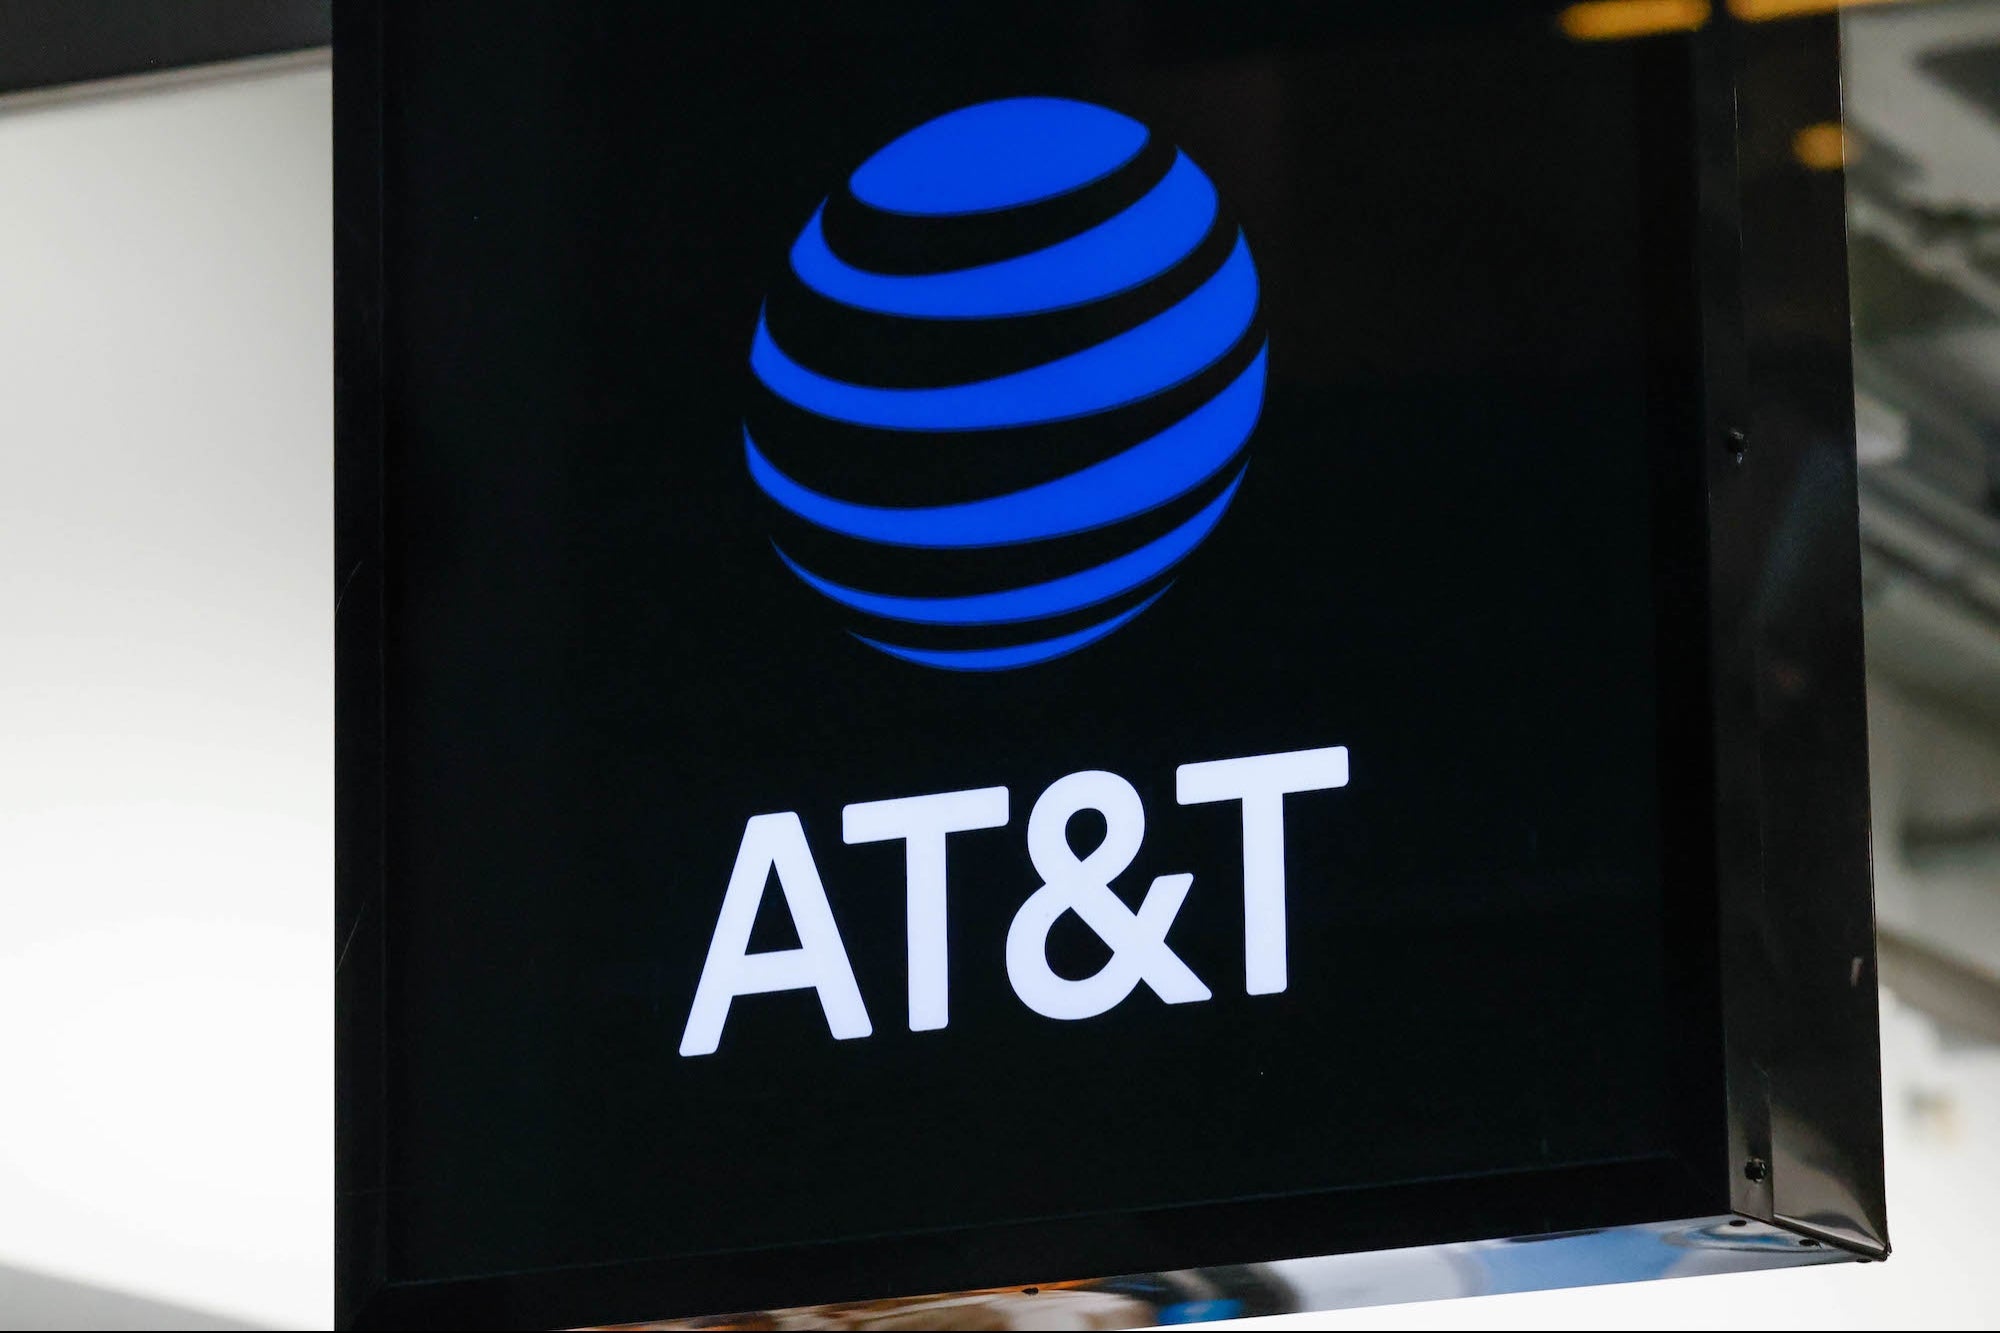 AT&T Customer Information Leaked to 'Dark Web' in Massive Data Hack, Millions Affected